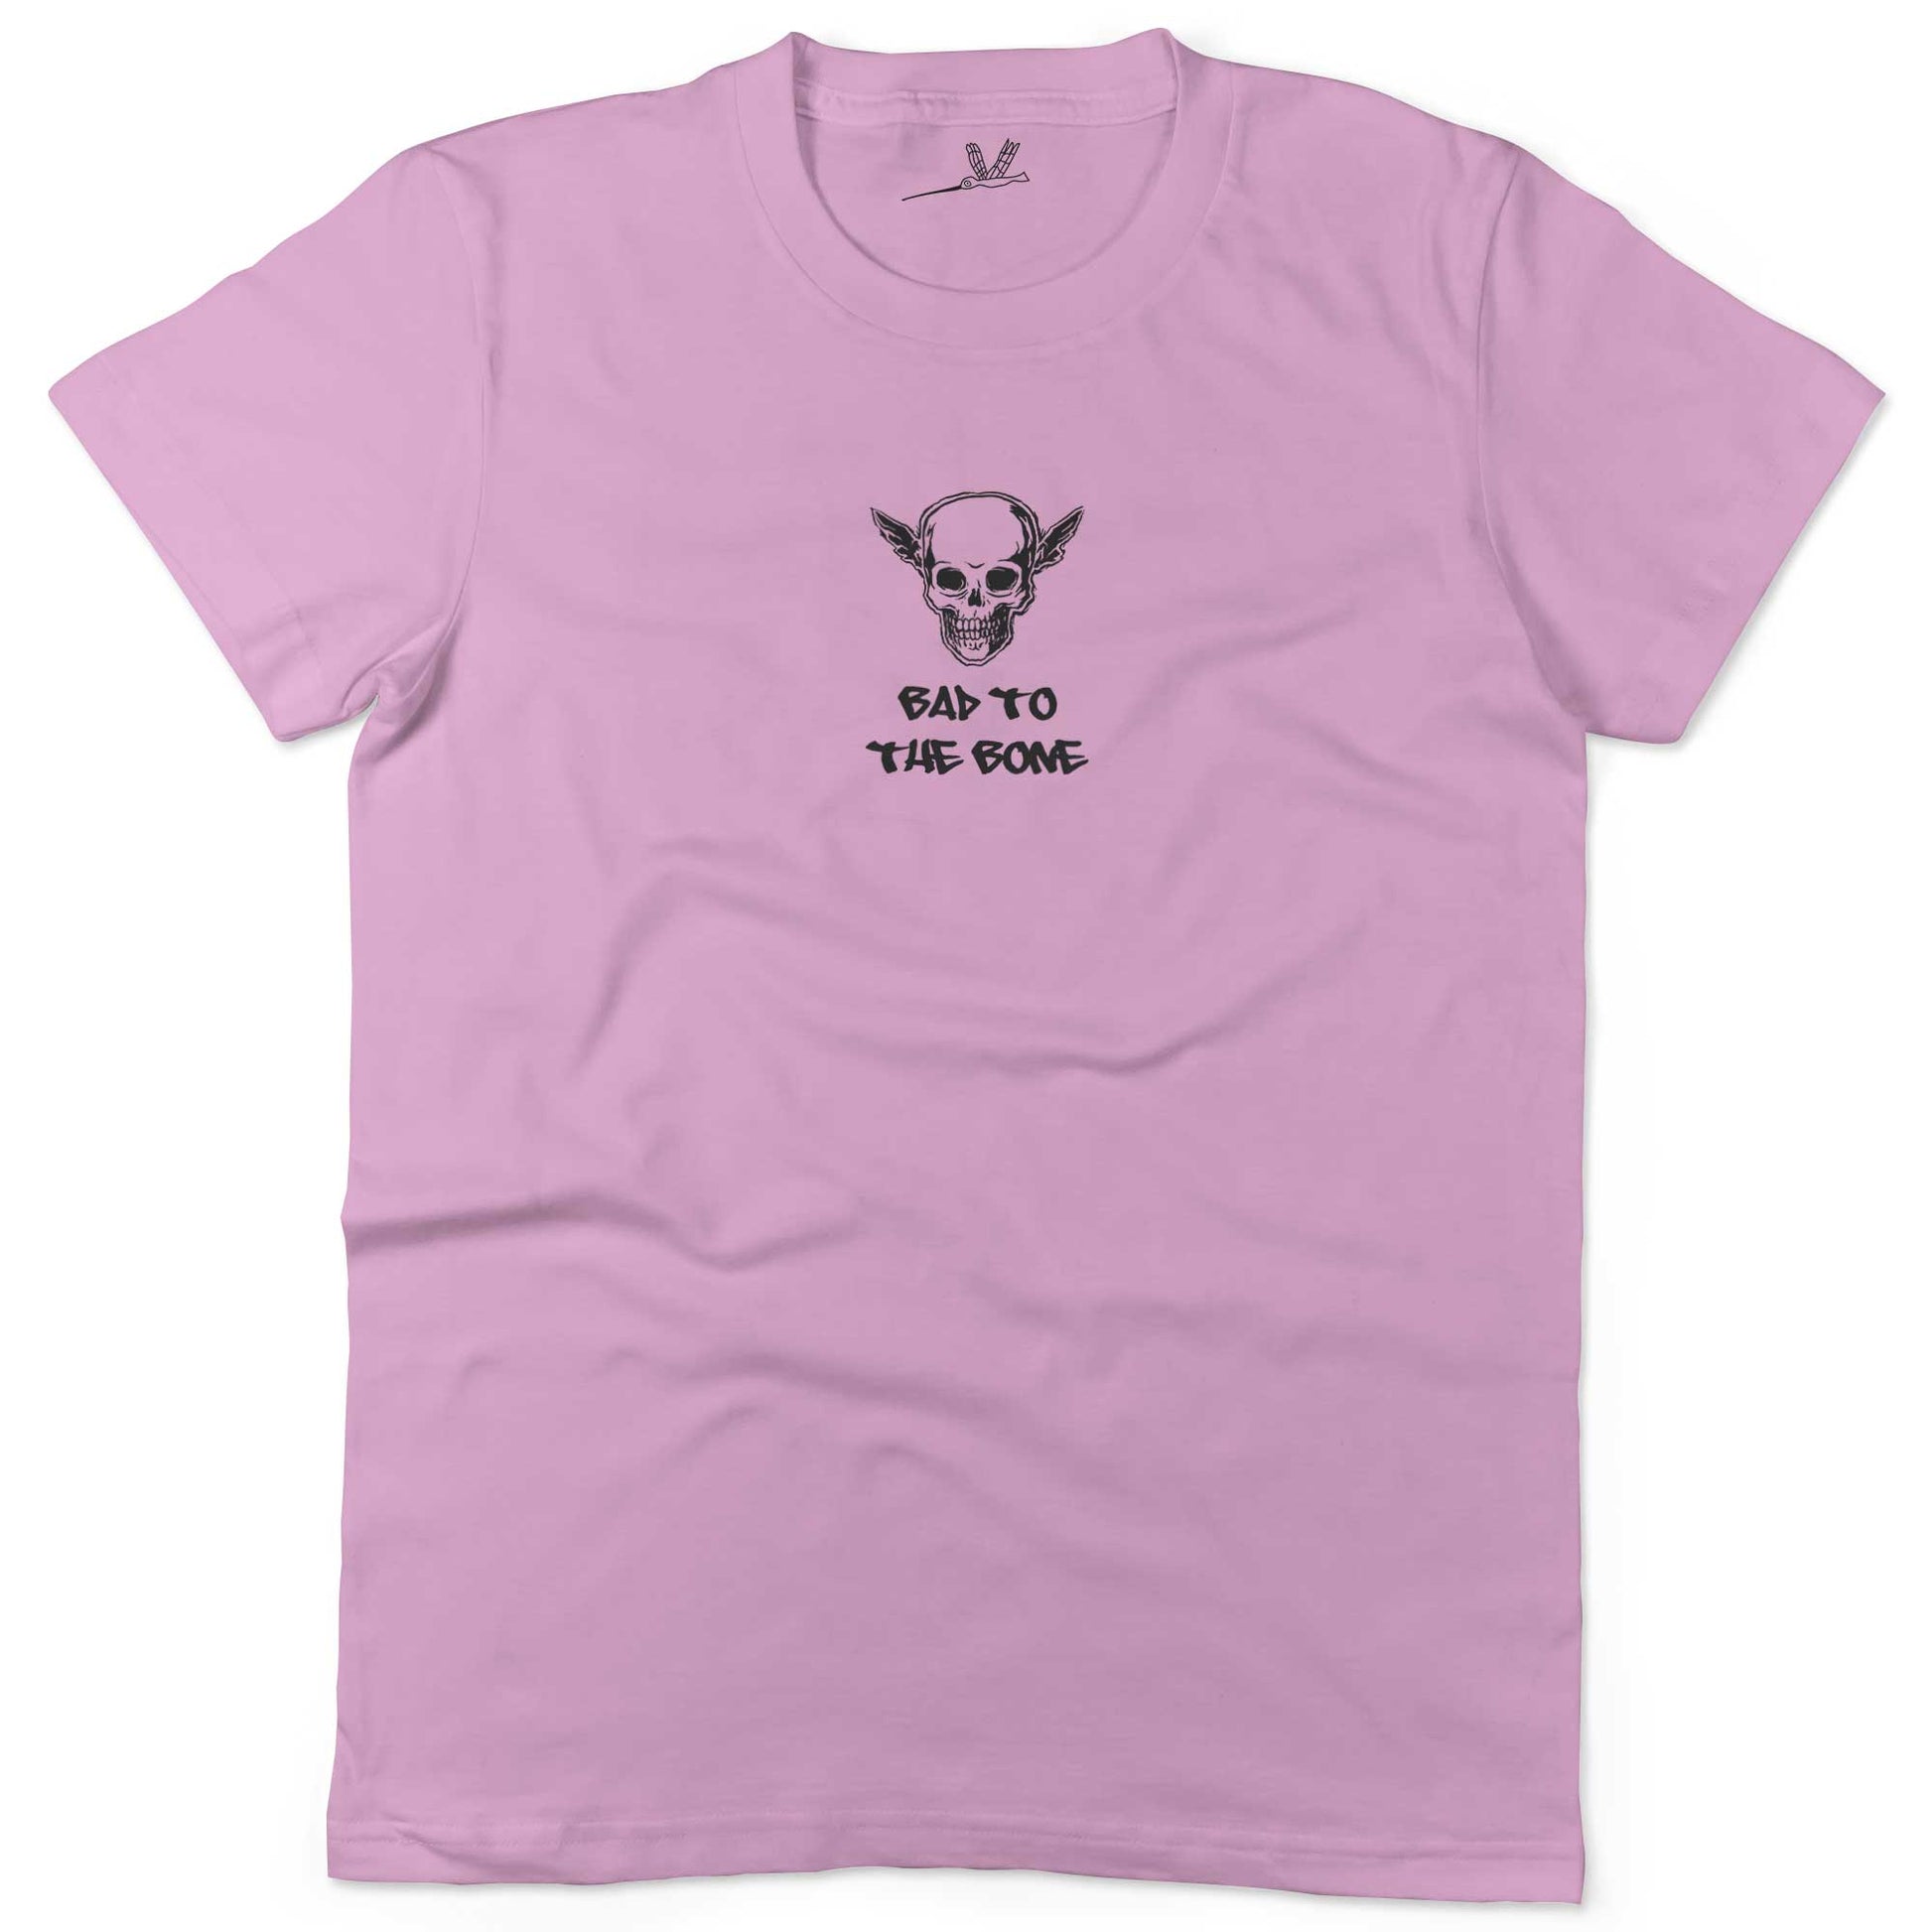 Bad To The Bone Unisex Or Women's Cotton T-shirt-Pink-Woman